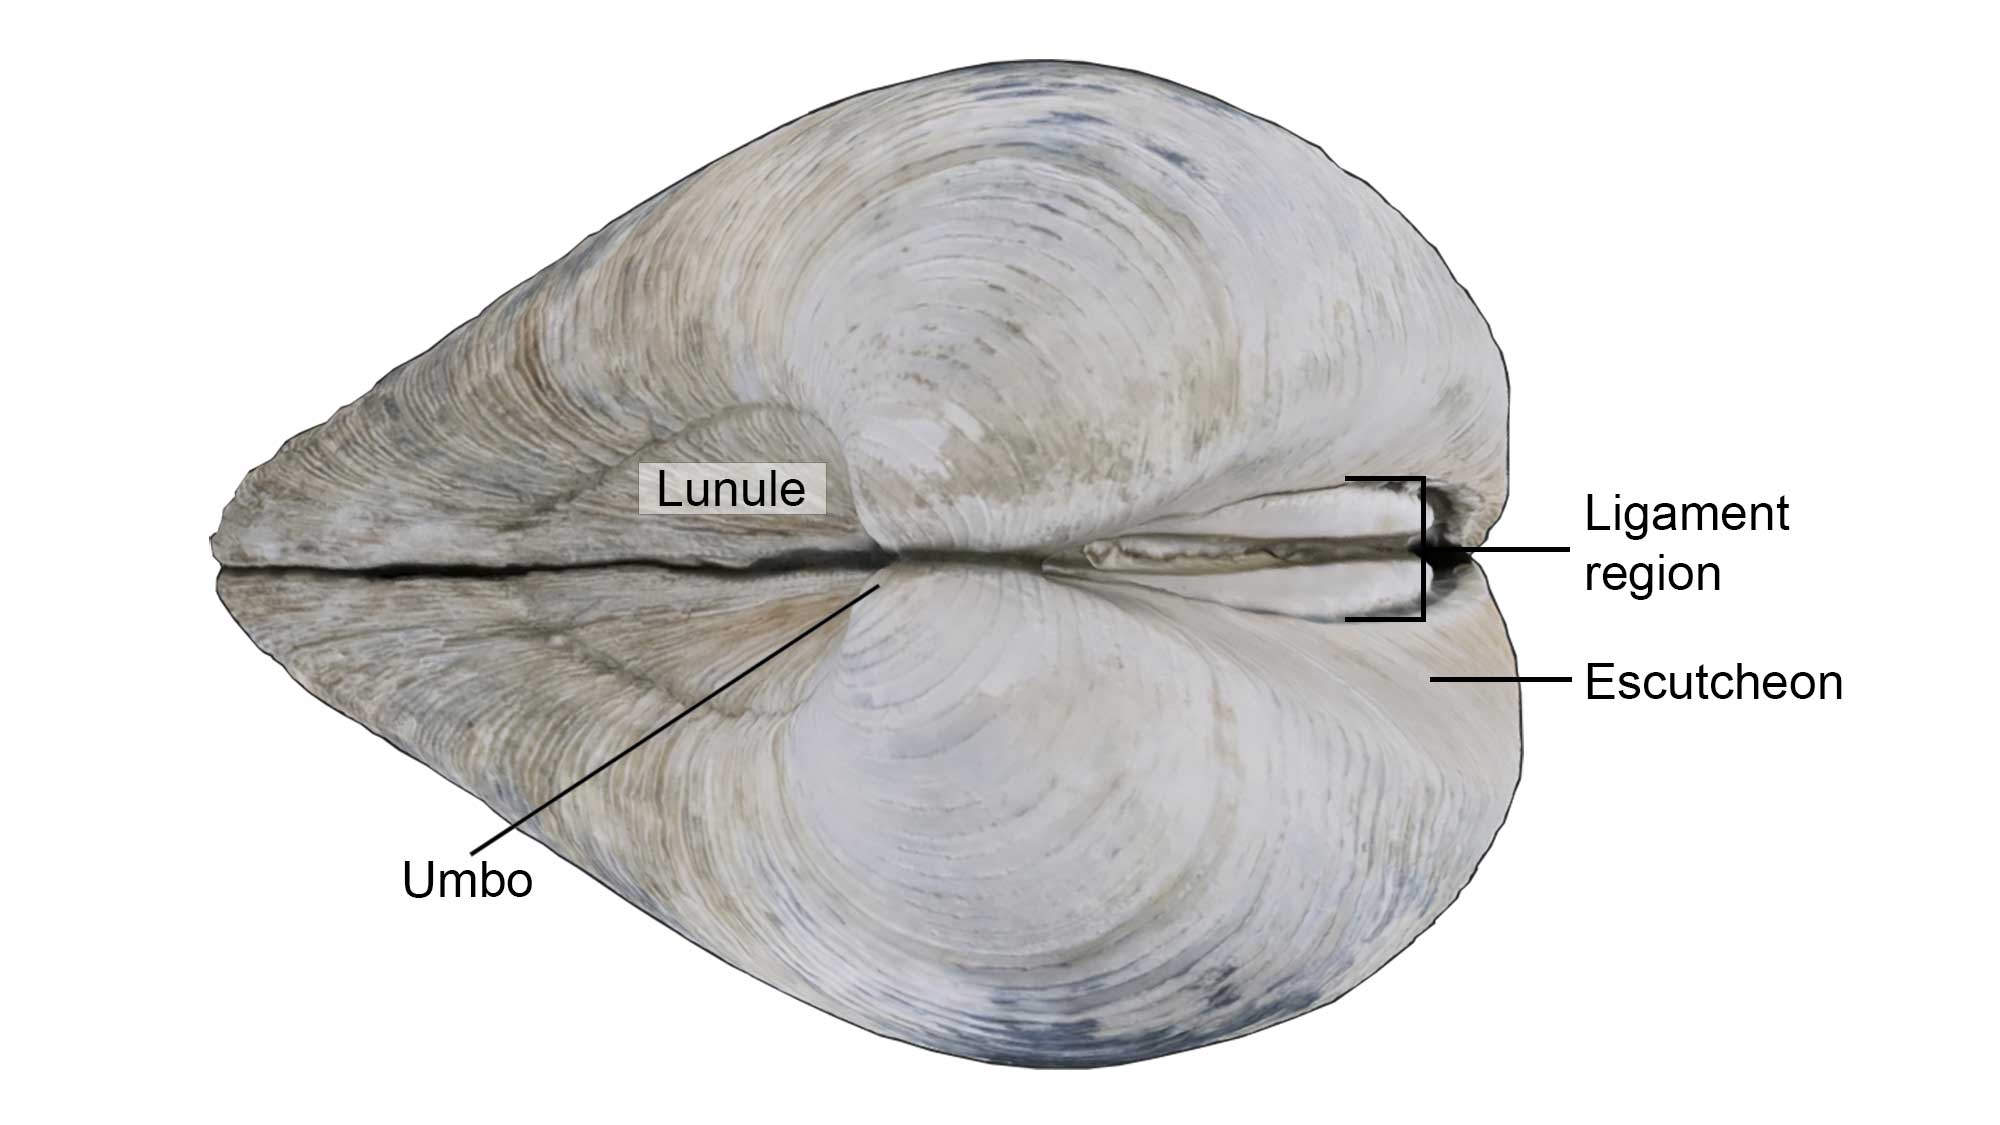 External features of the bivalve shell, including the lunule, escutcheon, ligament region, and umbo.